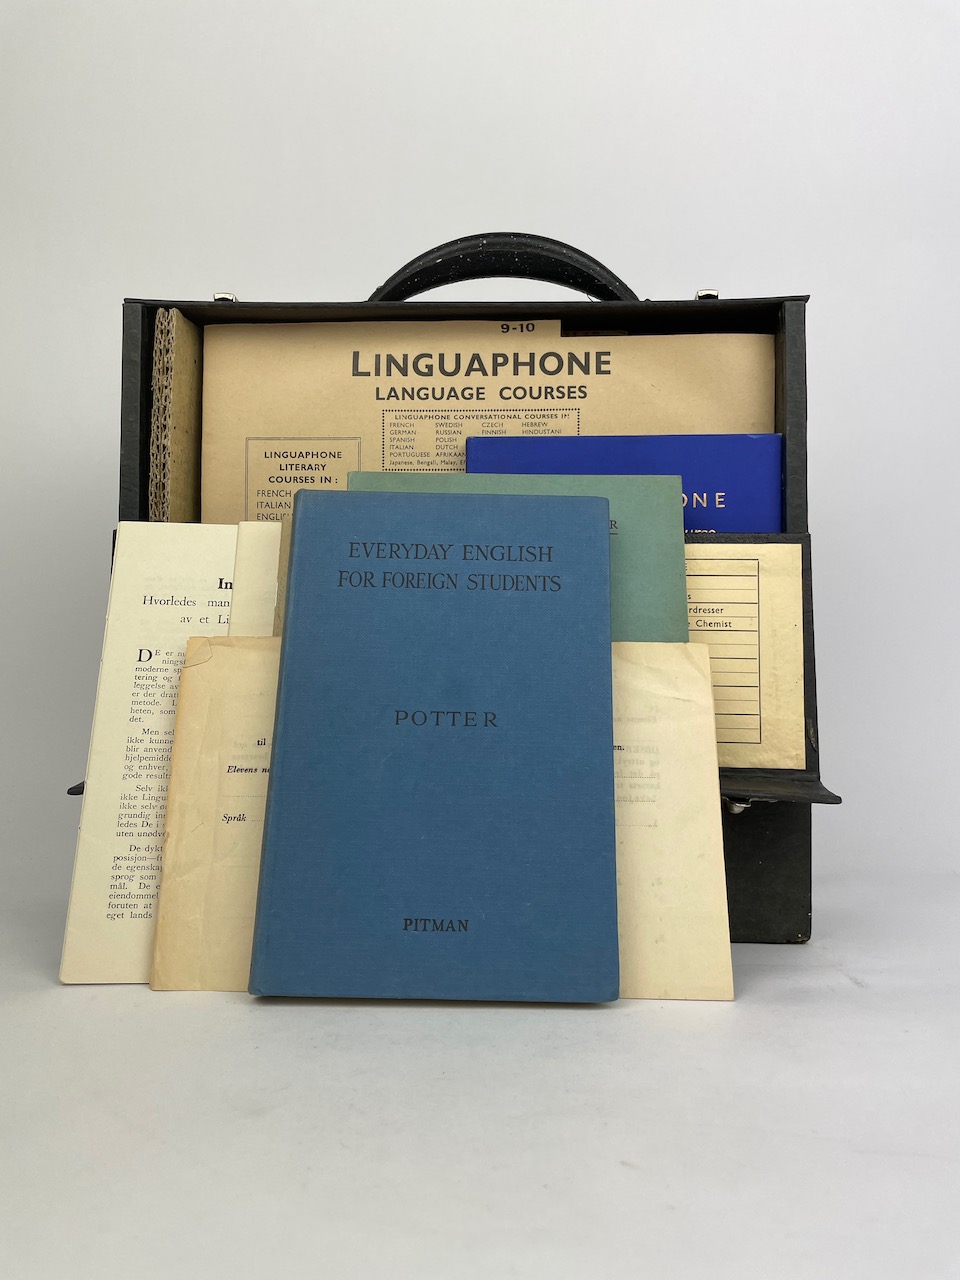 Linguaphone Conversational Course English - Complete set - 16 records and 6 booklets in original box 9